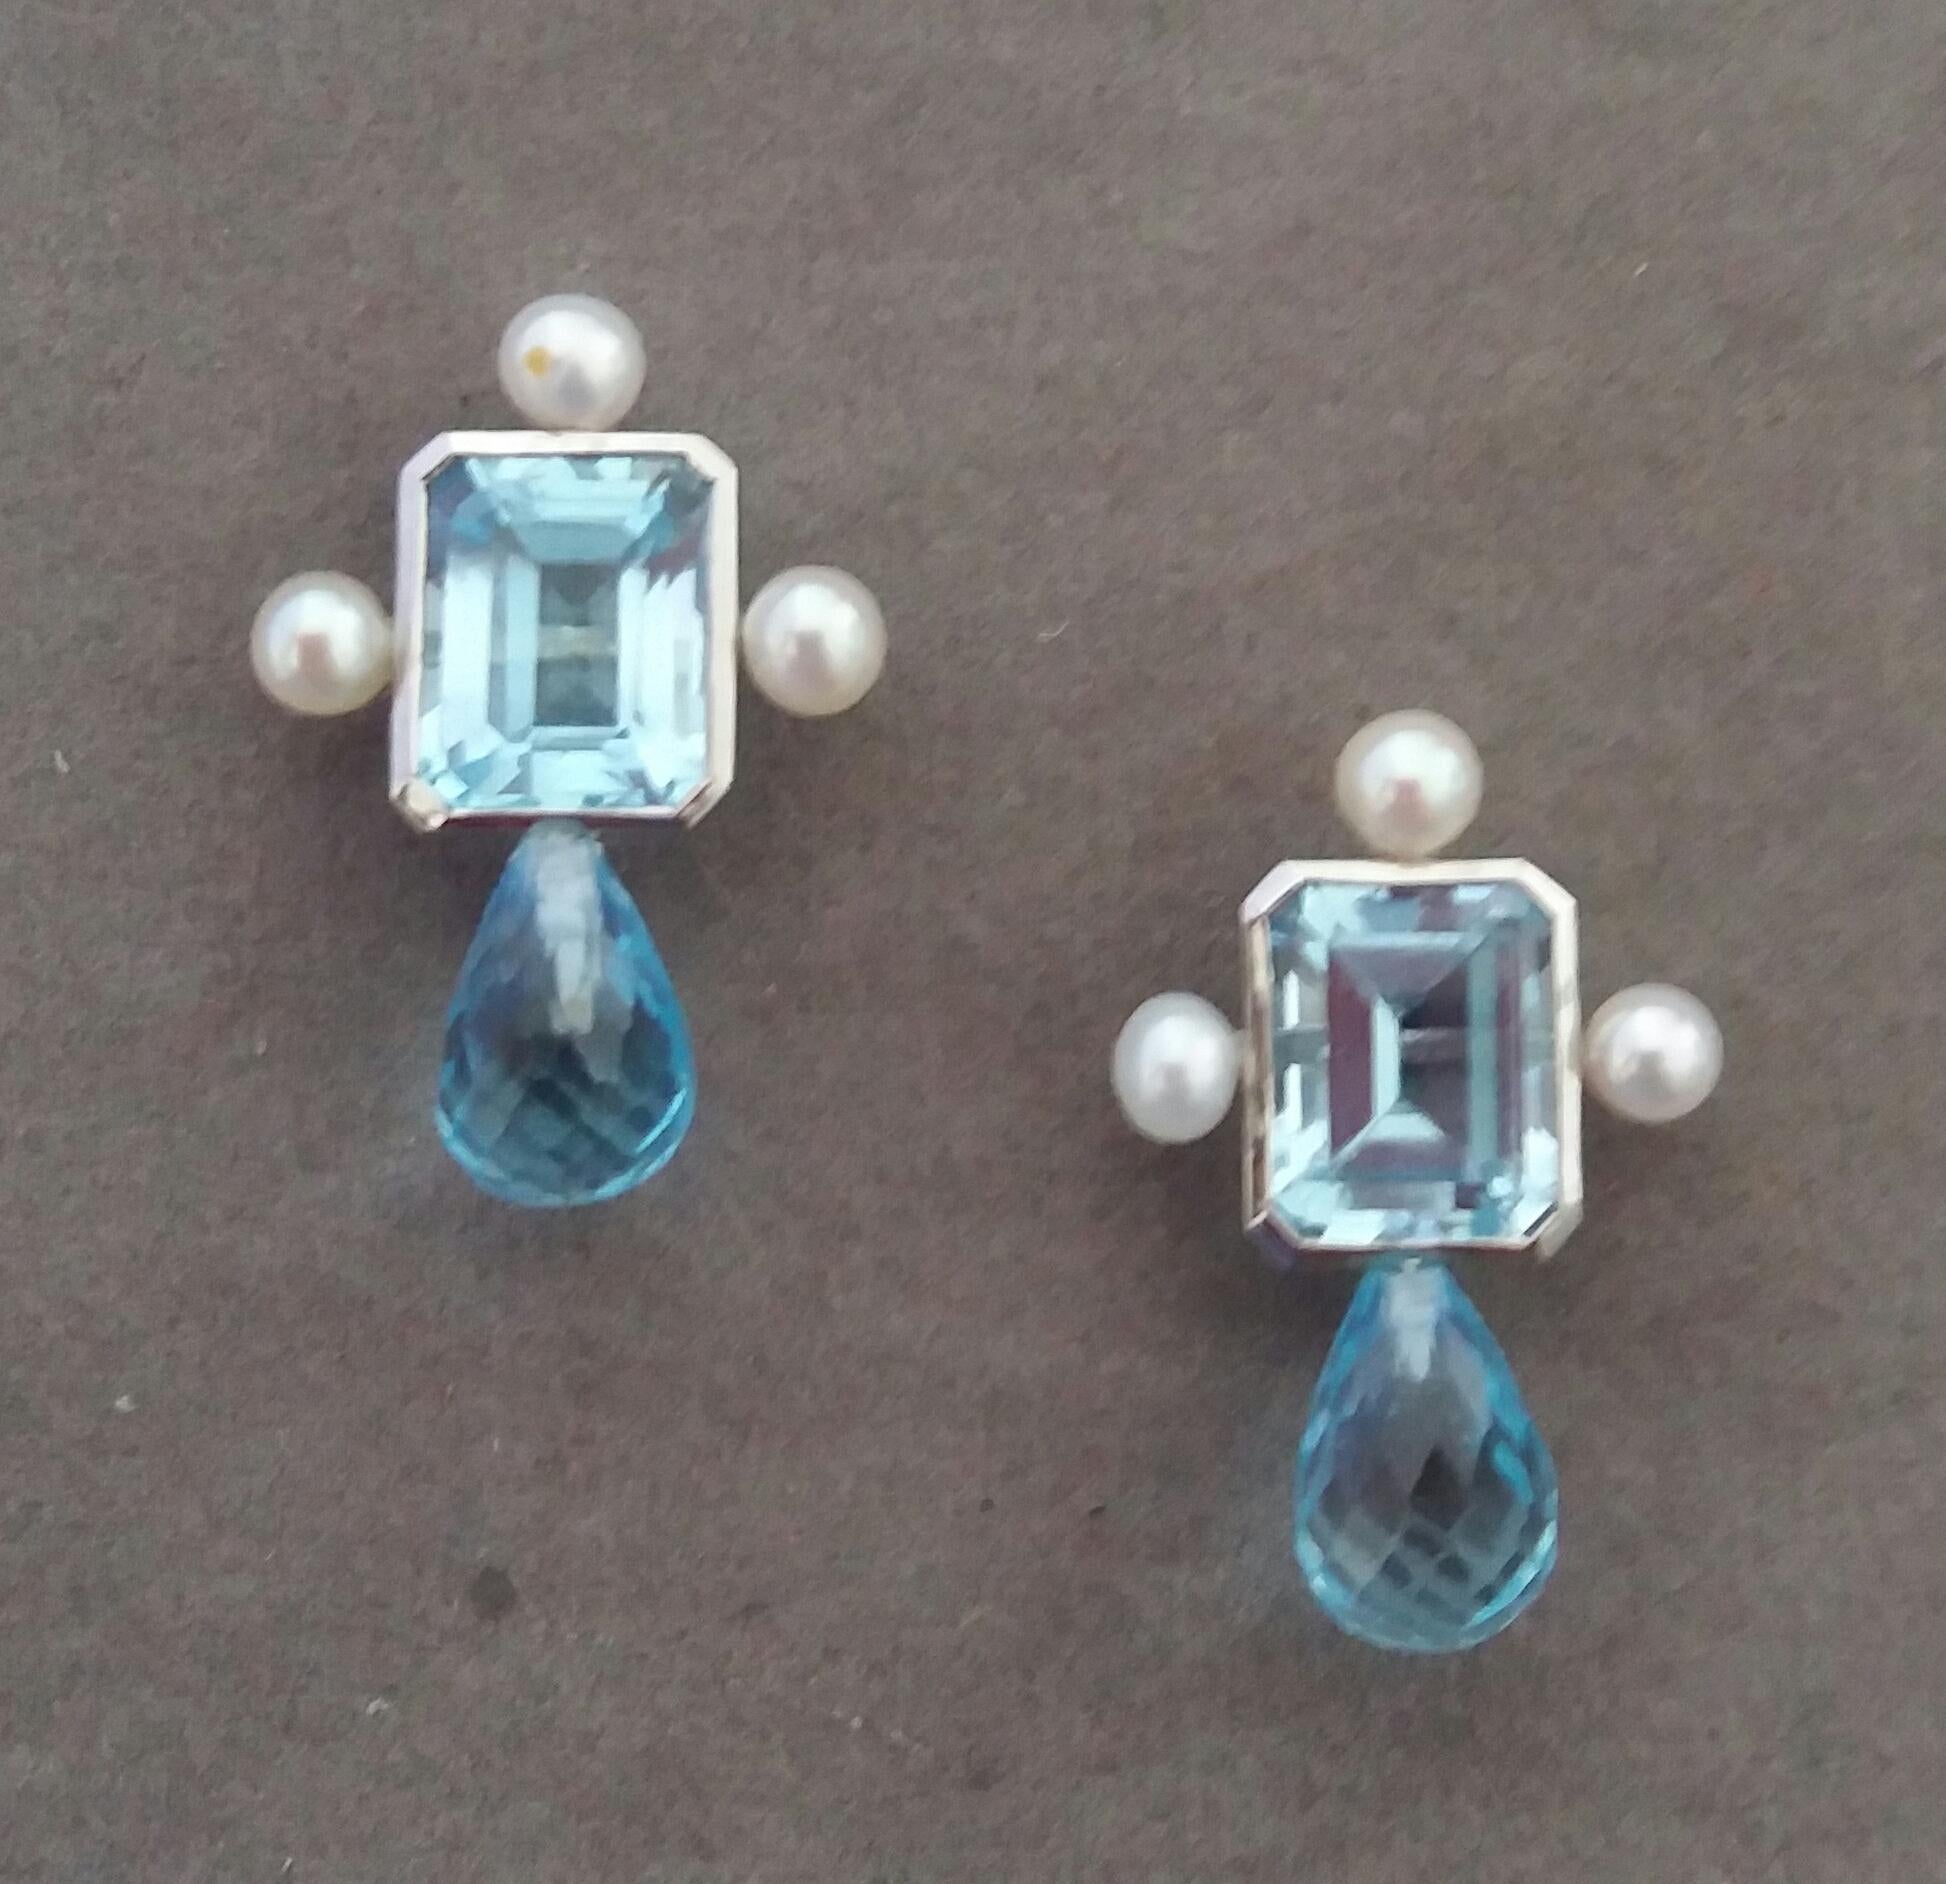 These elegant and handmade earrings have 2 Octagon Faceted Sky Blue Topaz measuring 9 x 11 mm set in a 14 Kt white gold bezel with 3 small round pearls of 4mm on 3 sides at the top to which are suspended 2 Round Drops Faceted Sky Blue Topaz